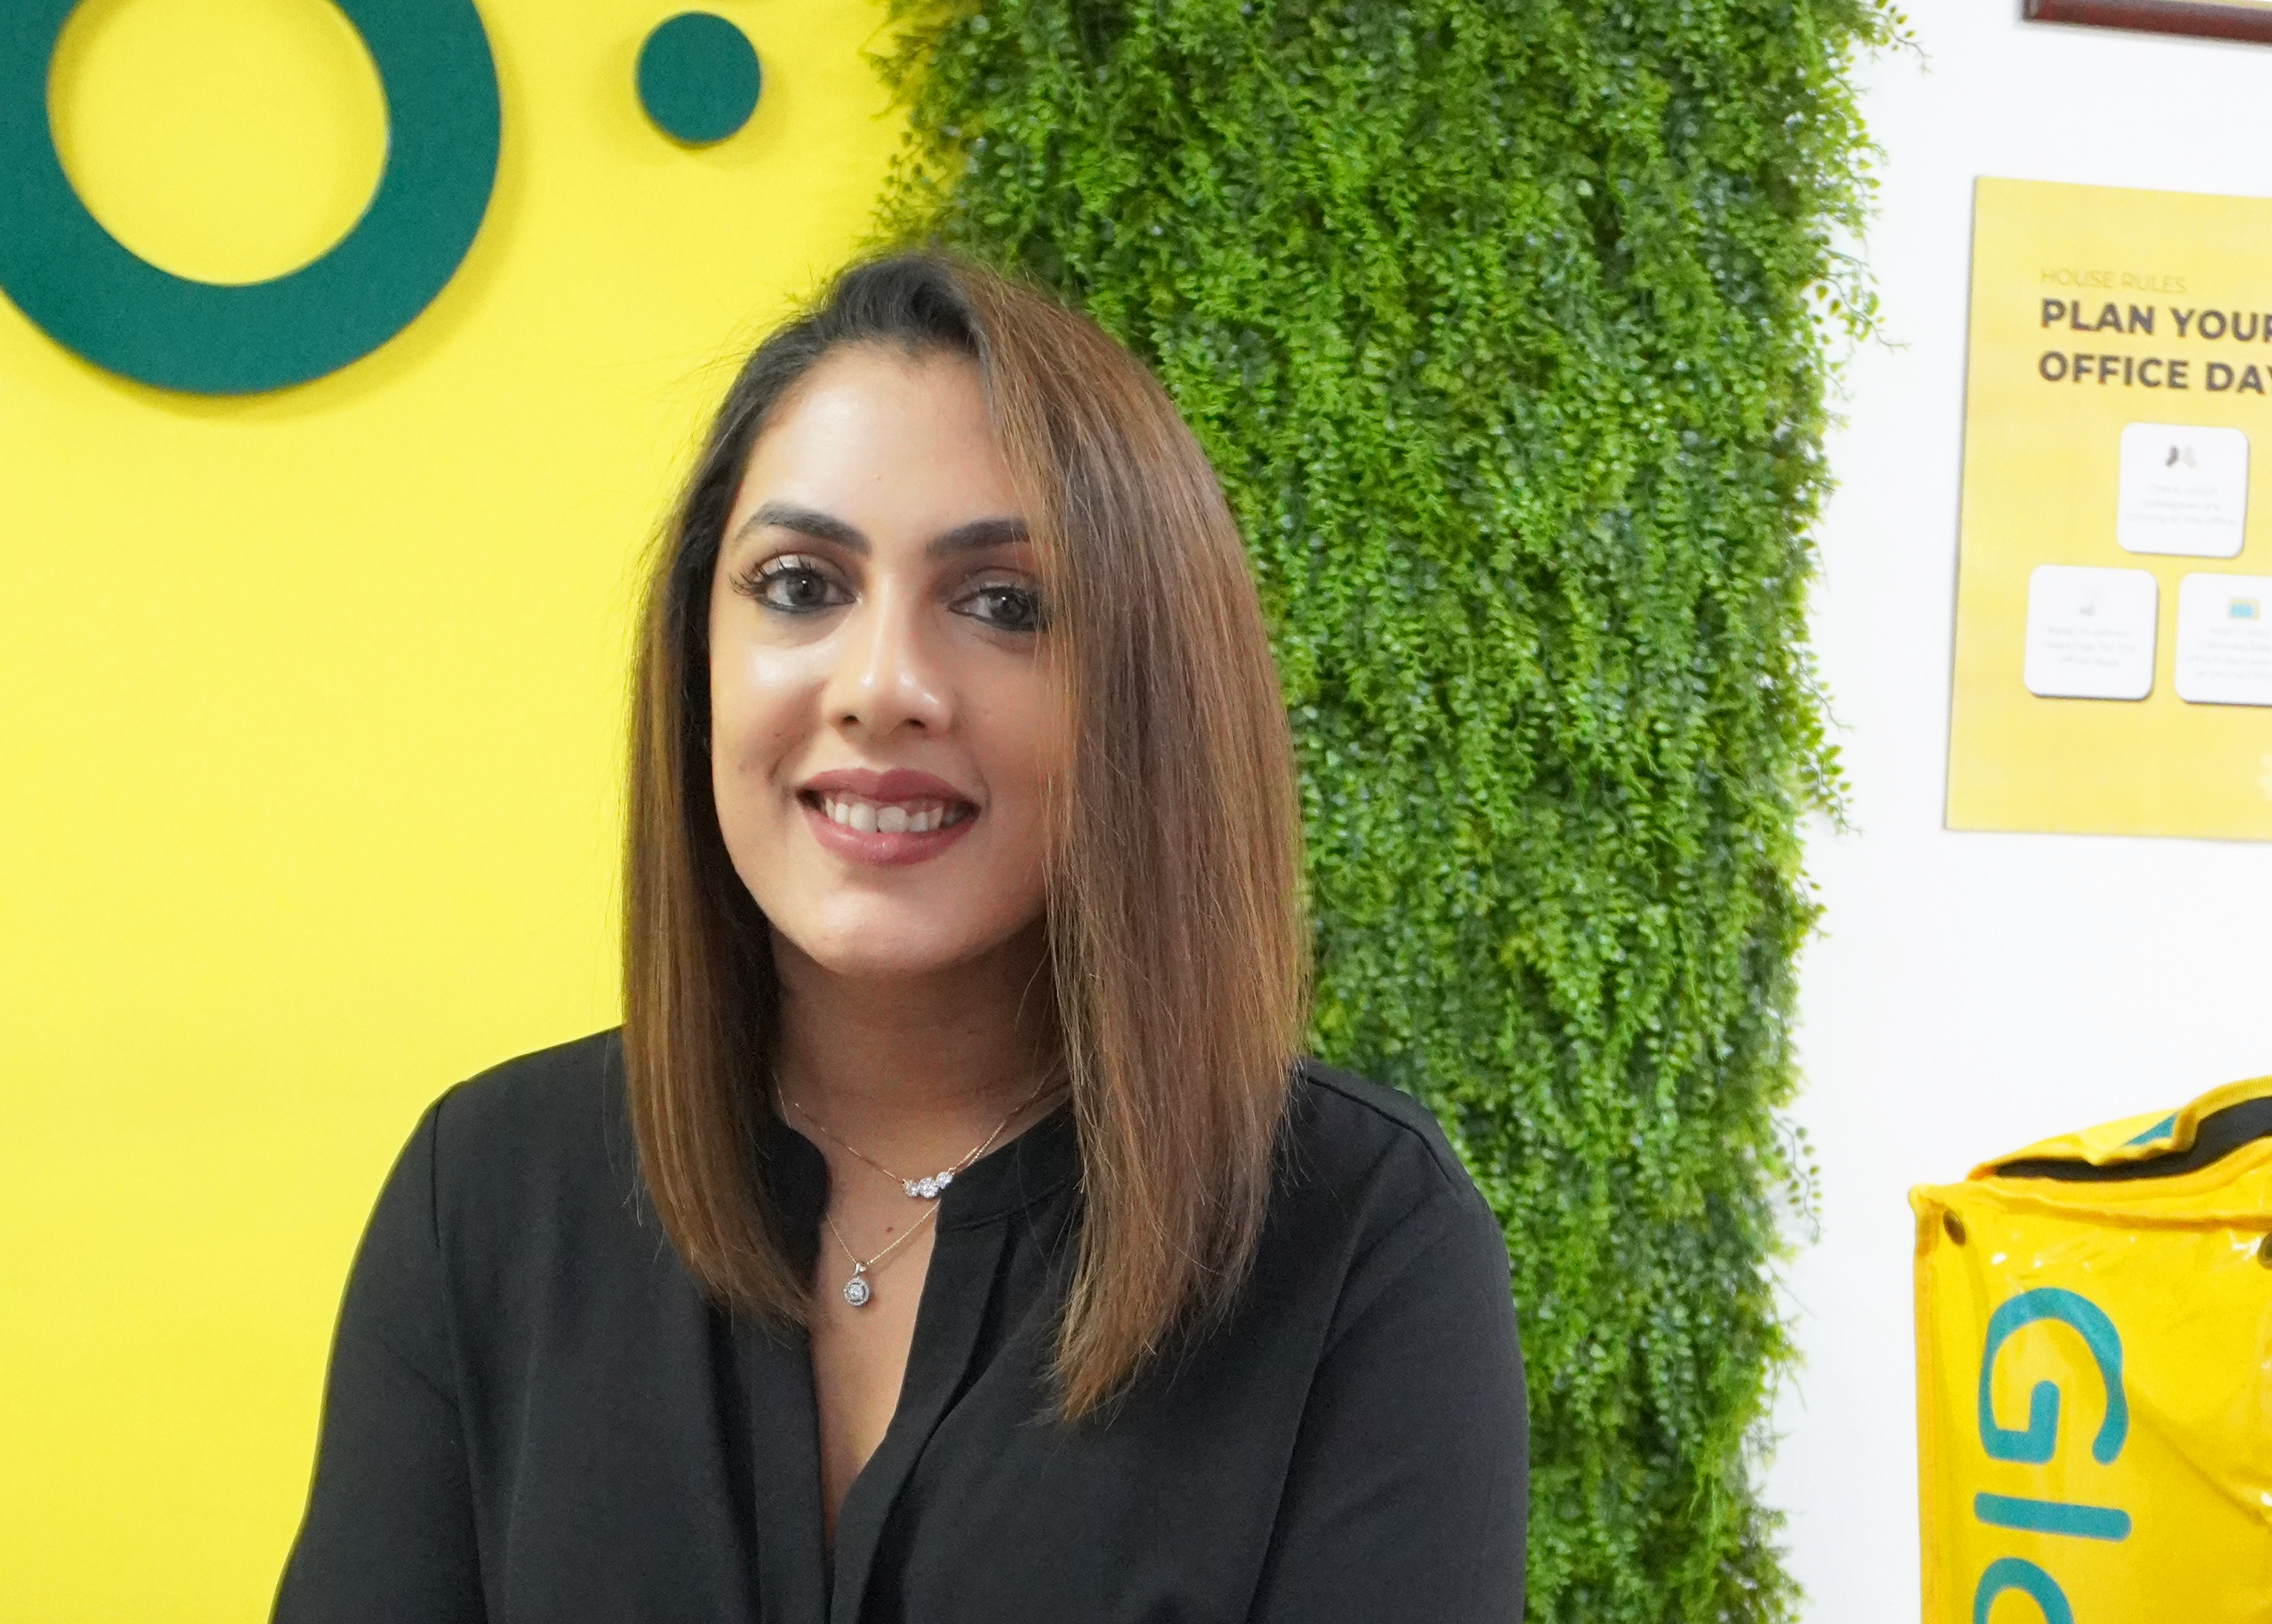 Multi-category delivery platform, Glovo, has appointed Sonali Patel Visram as its new Chief Commercial Officer (CCO) for Kenya.